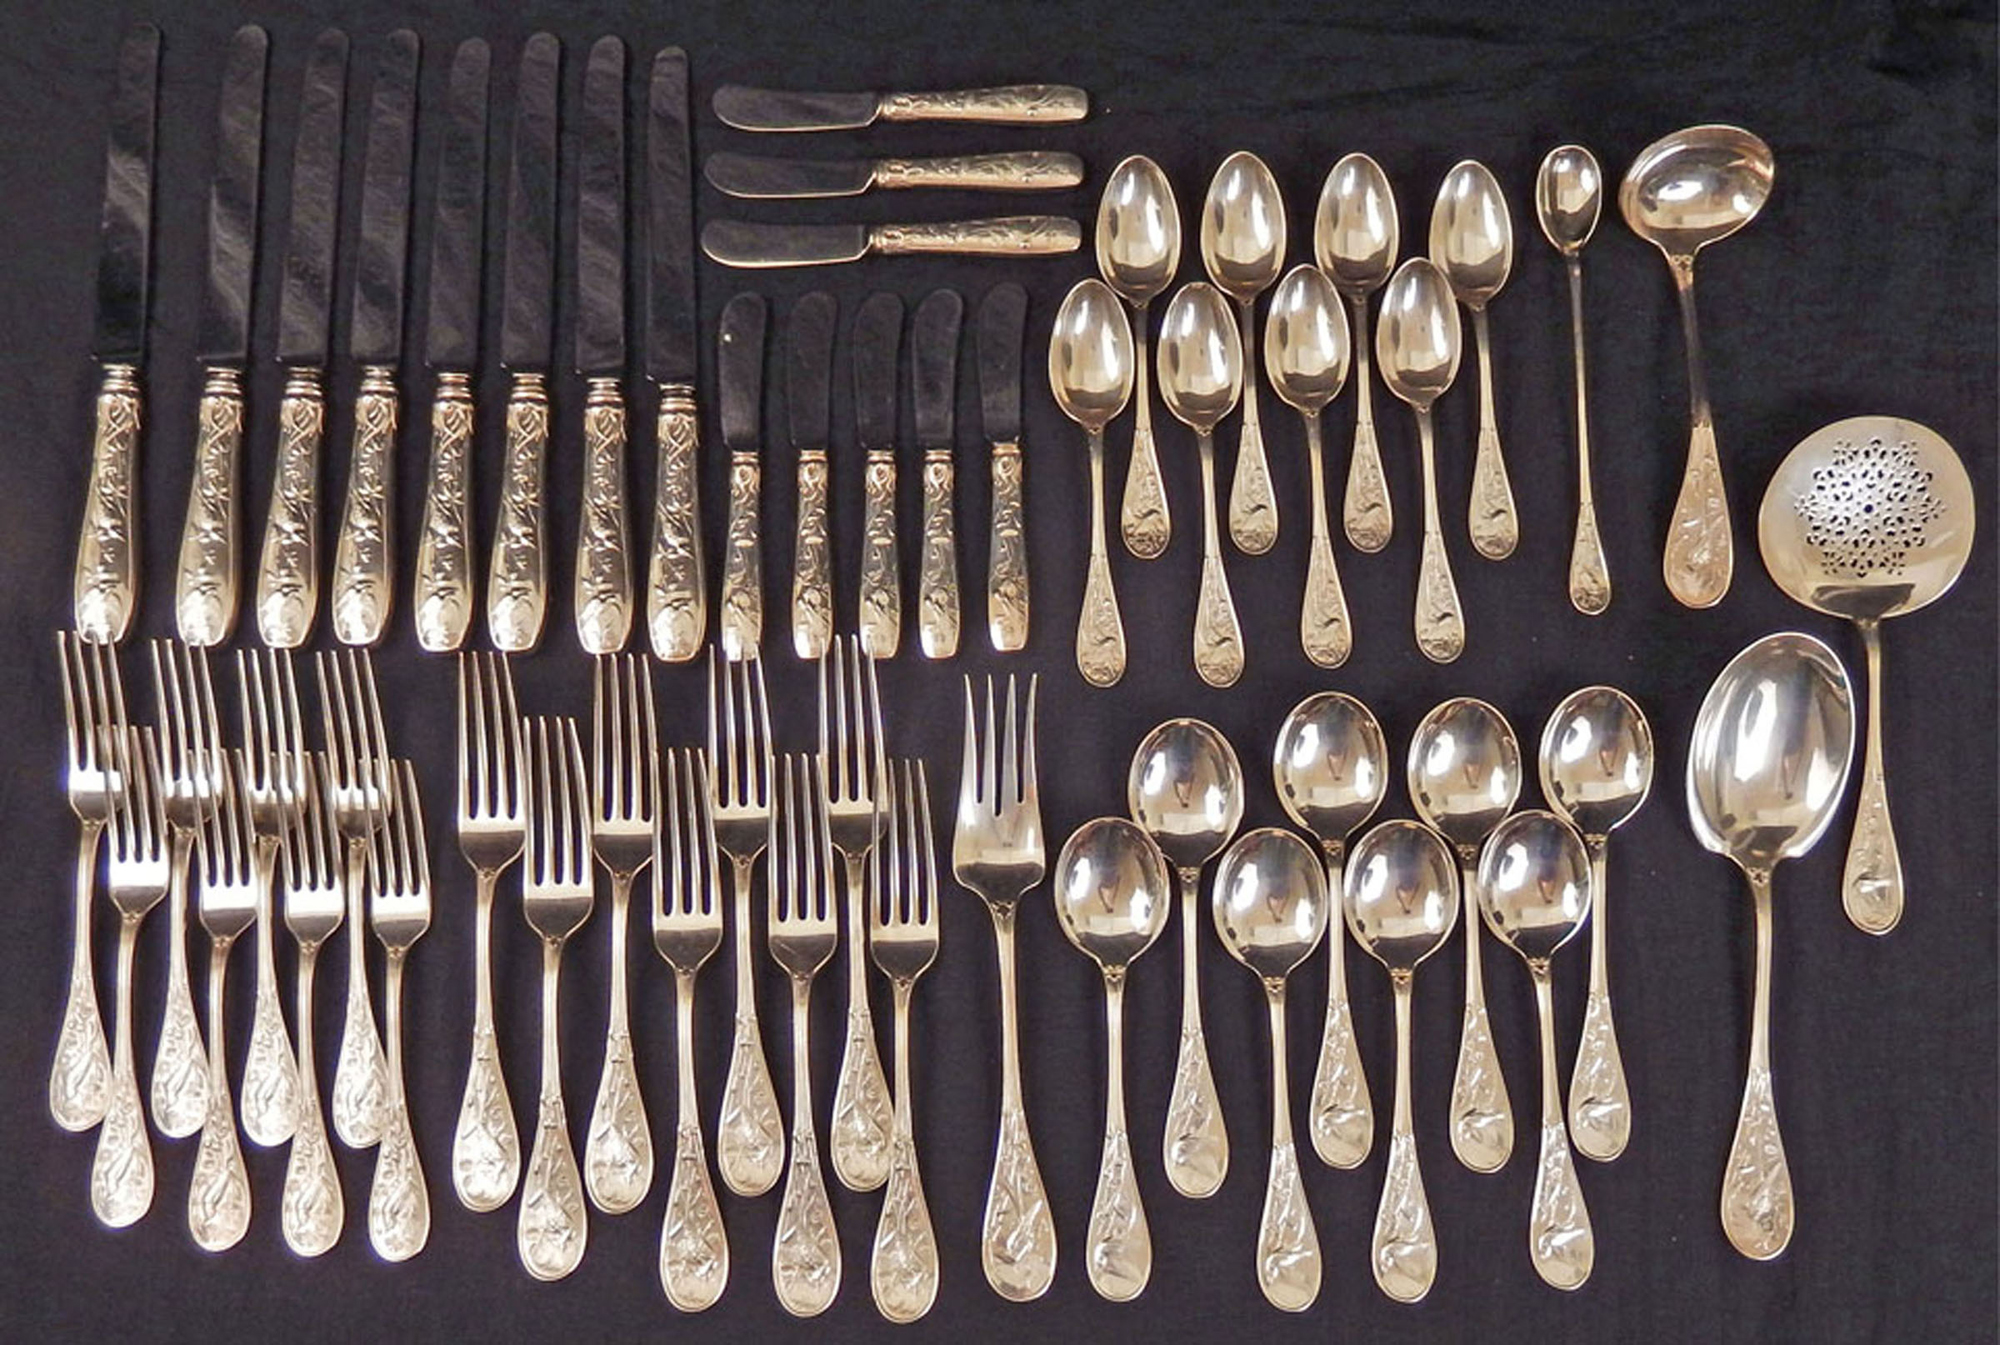 Tiffany & Co. 53-piece sterling silver service for 8, Audubon pattern, total weight 96.4 ozt. Stephenson’s Auctioneers image